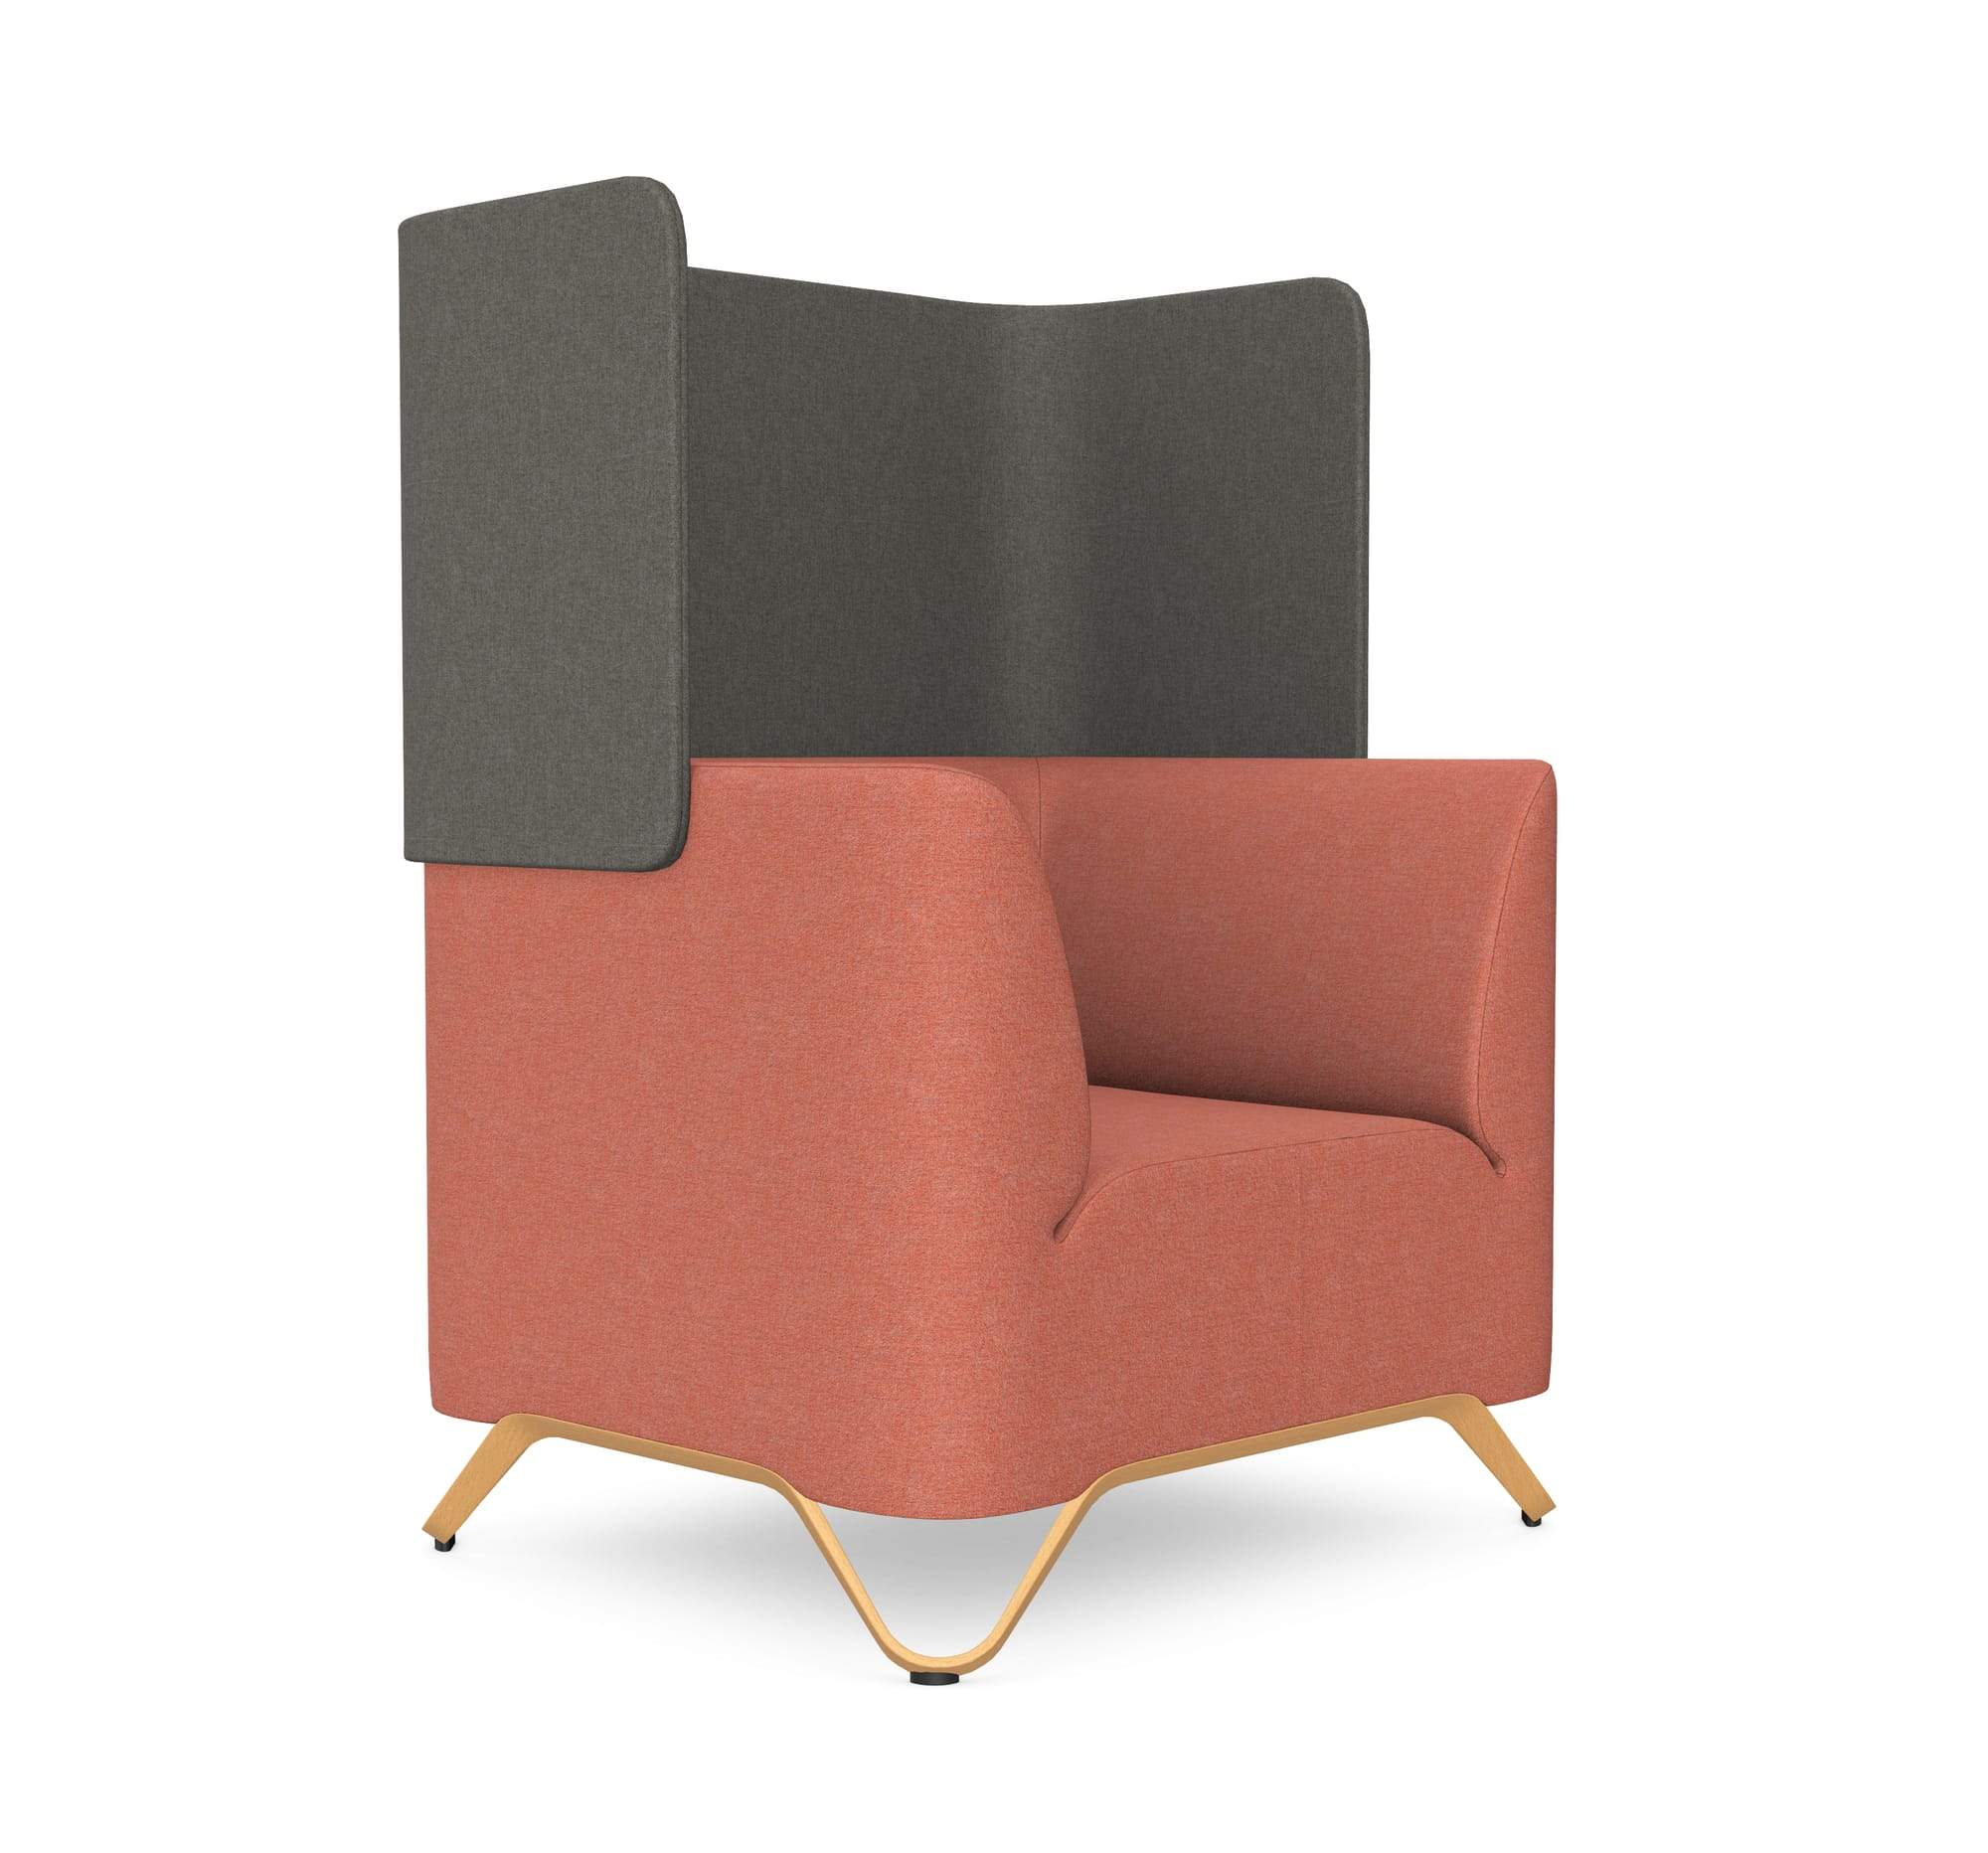 SoftBox Armchair with Wall - Model 11W